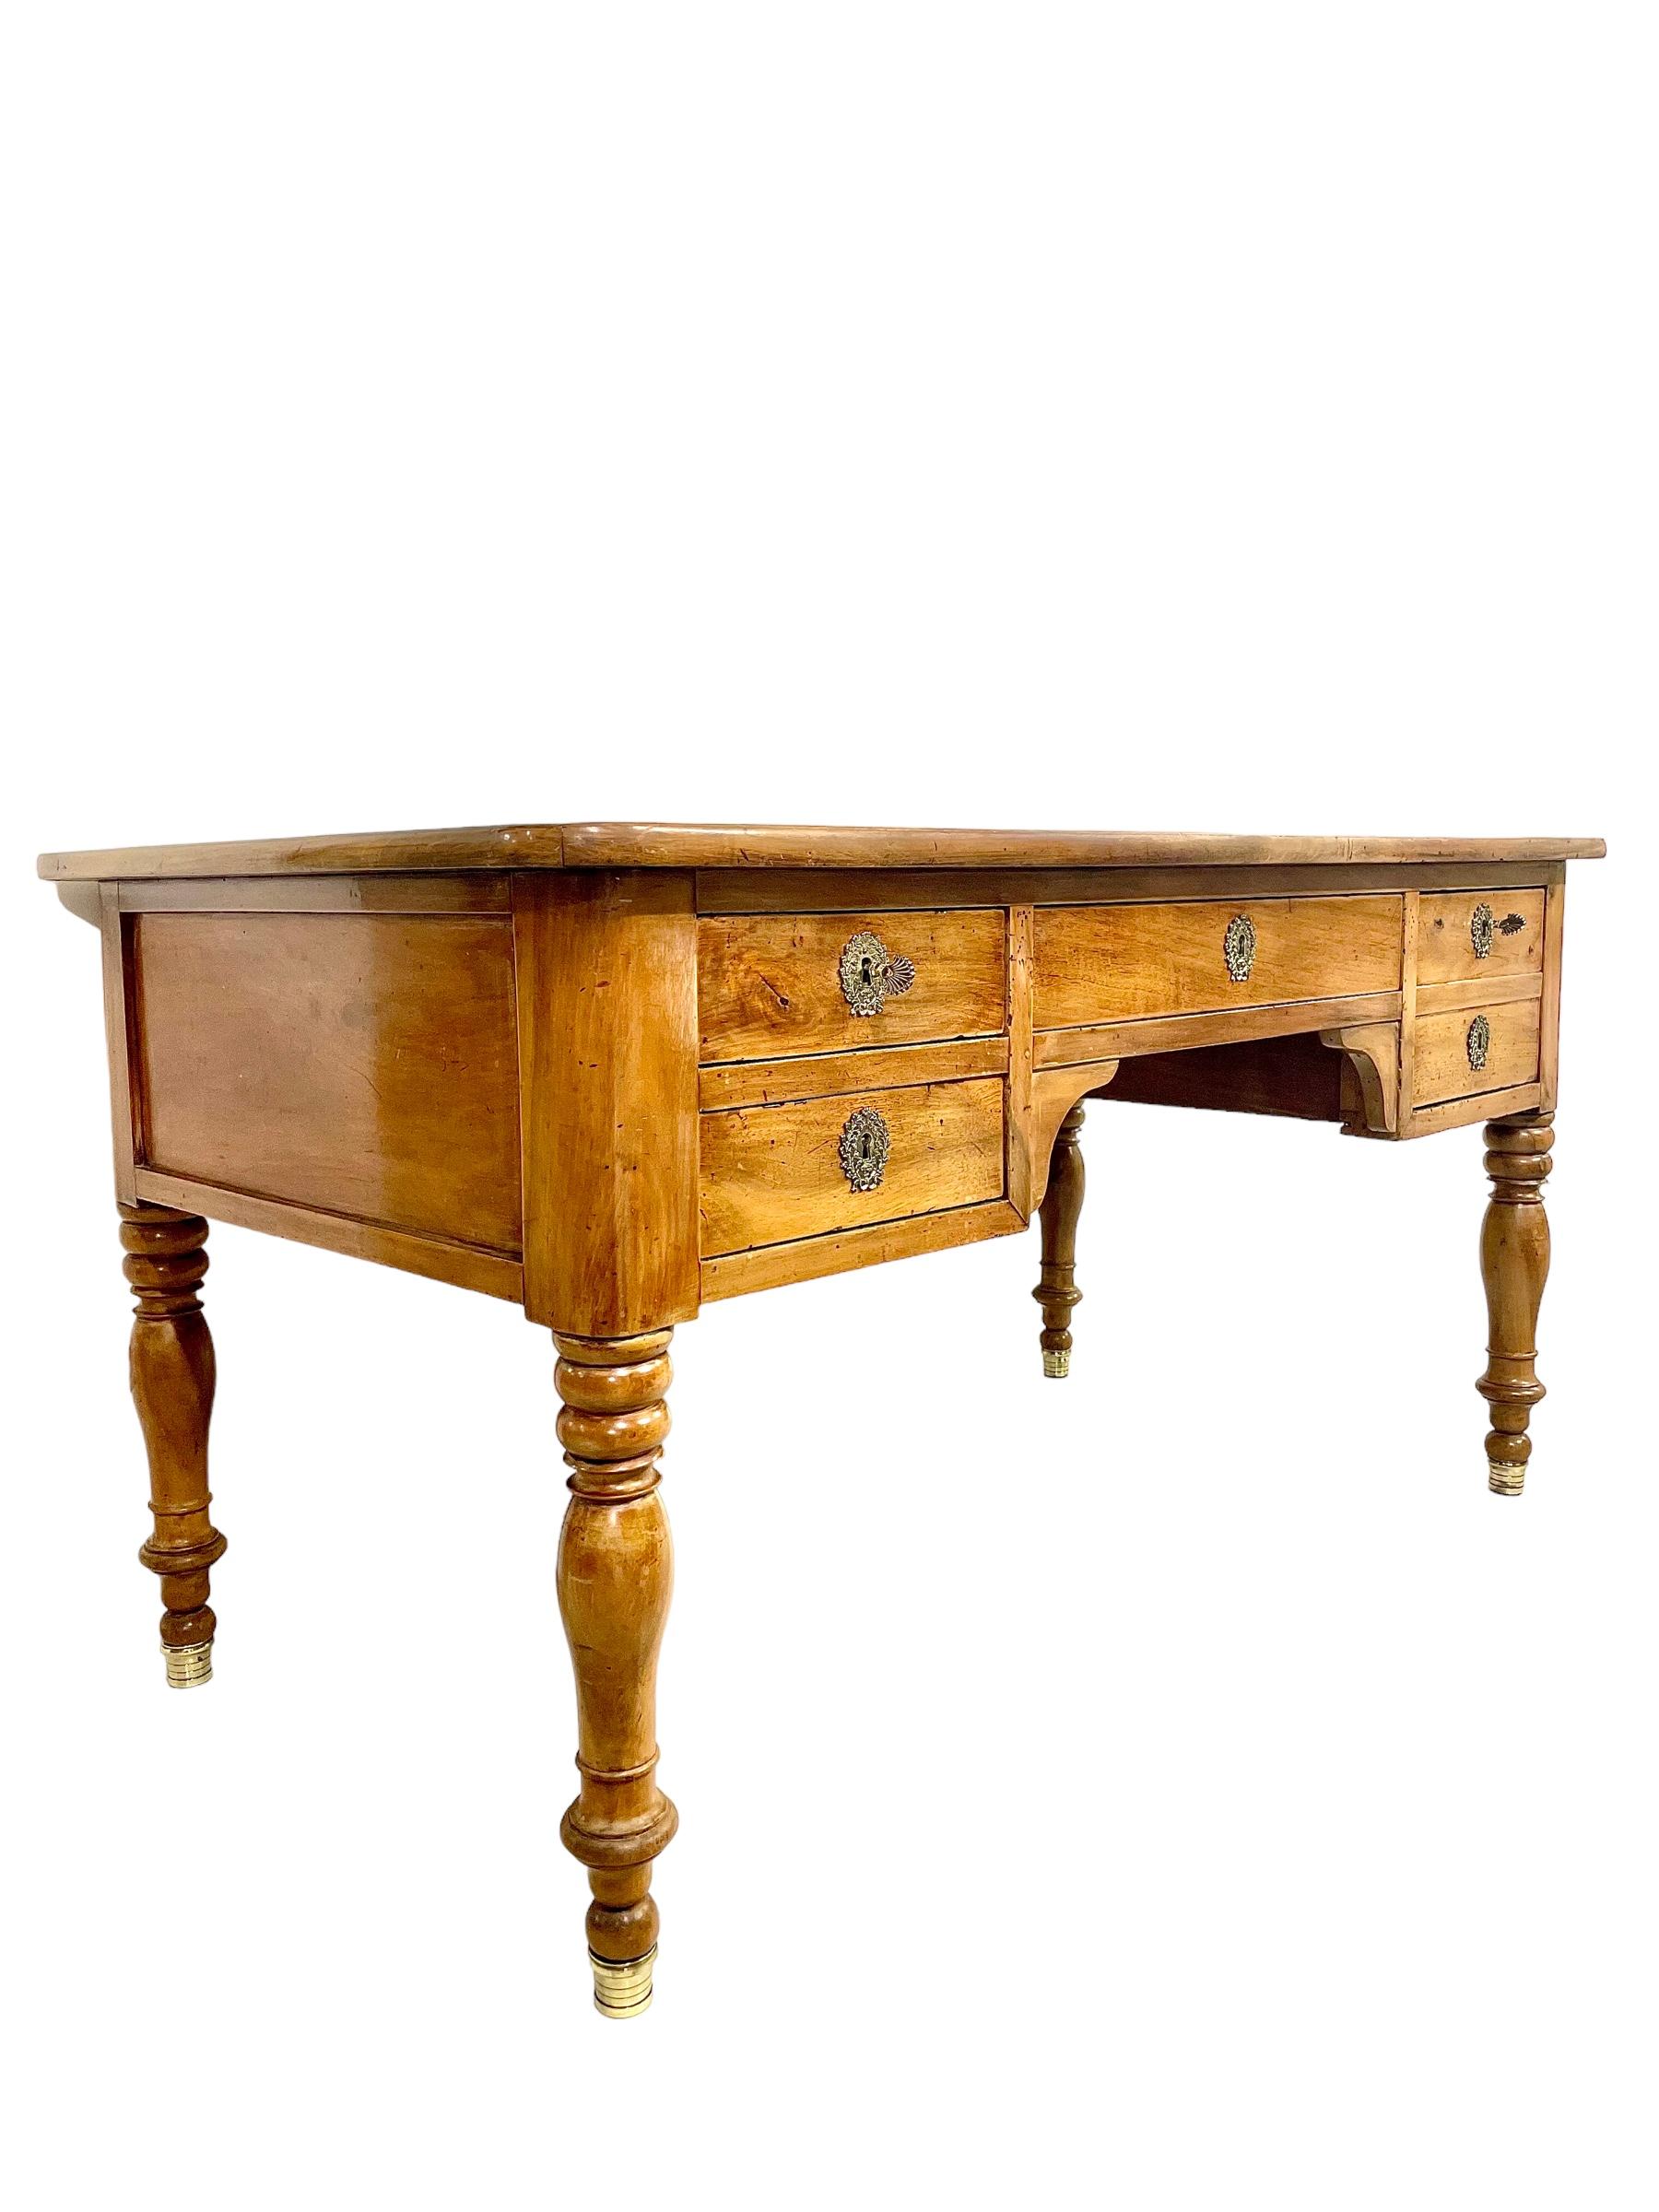 A very handsome 19th century partners' desk with five drawers. The finish is natural wood, with smoothly rounded corners and sturdy turned legs terminating in brass sabots. The rectangular top is inlaid with gold tooled green leather to form a